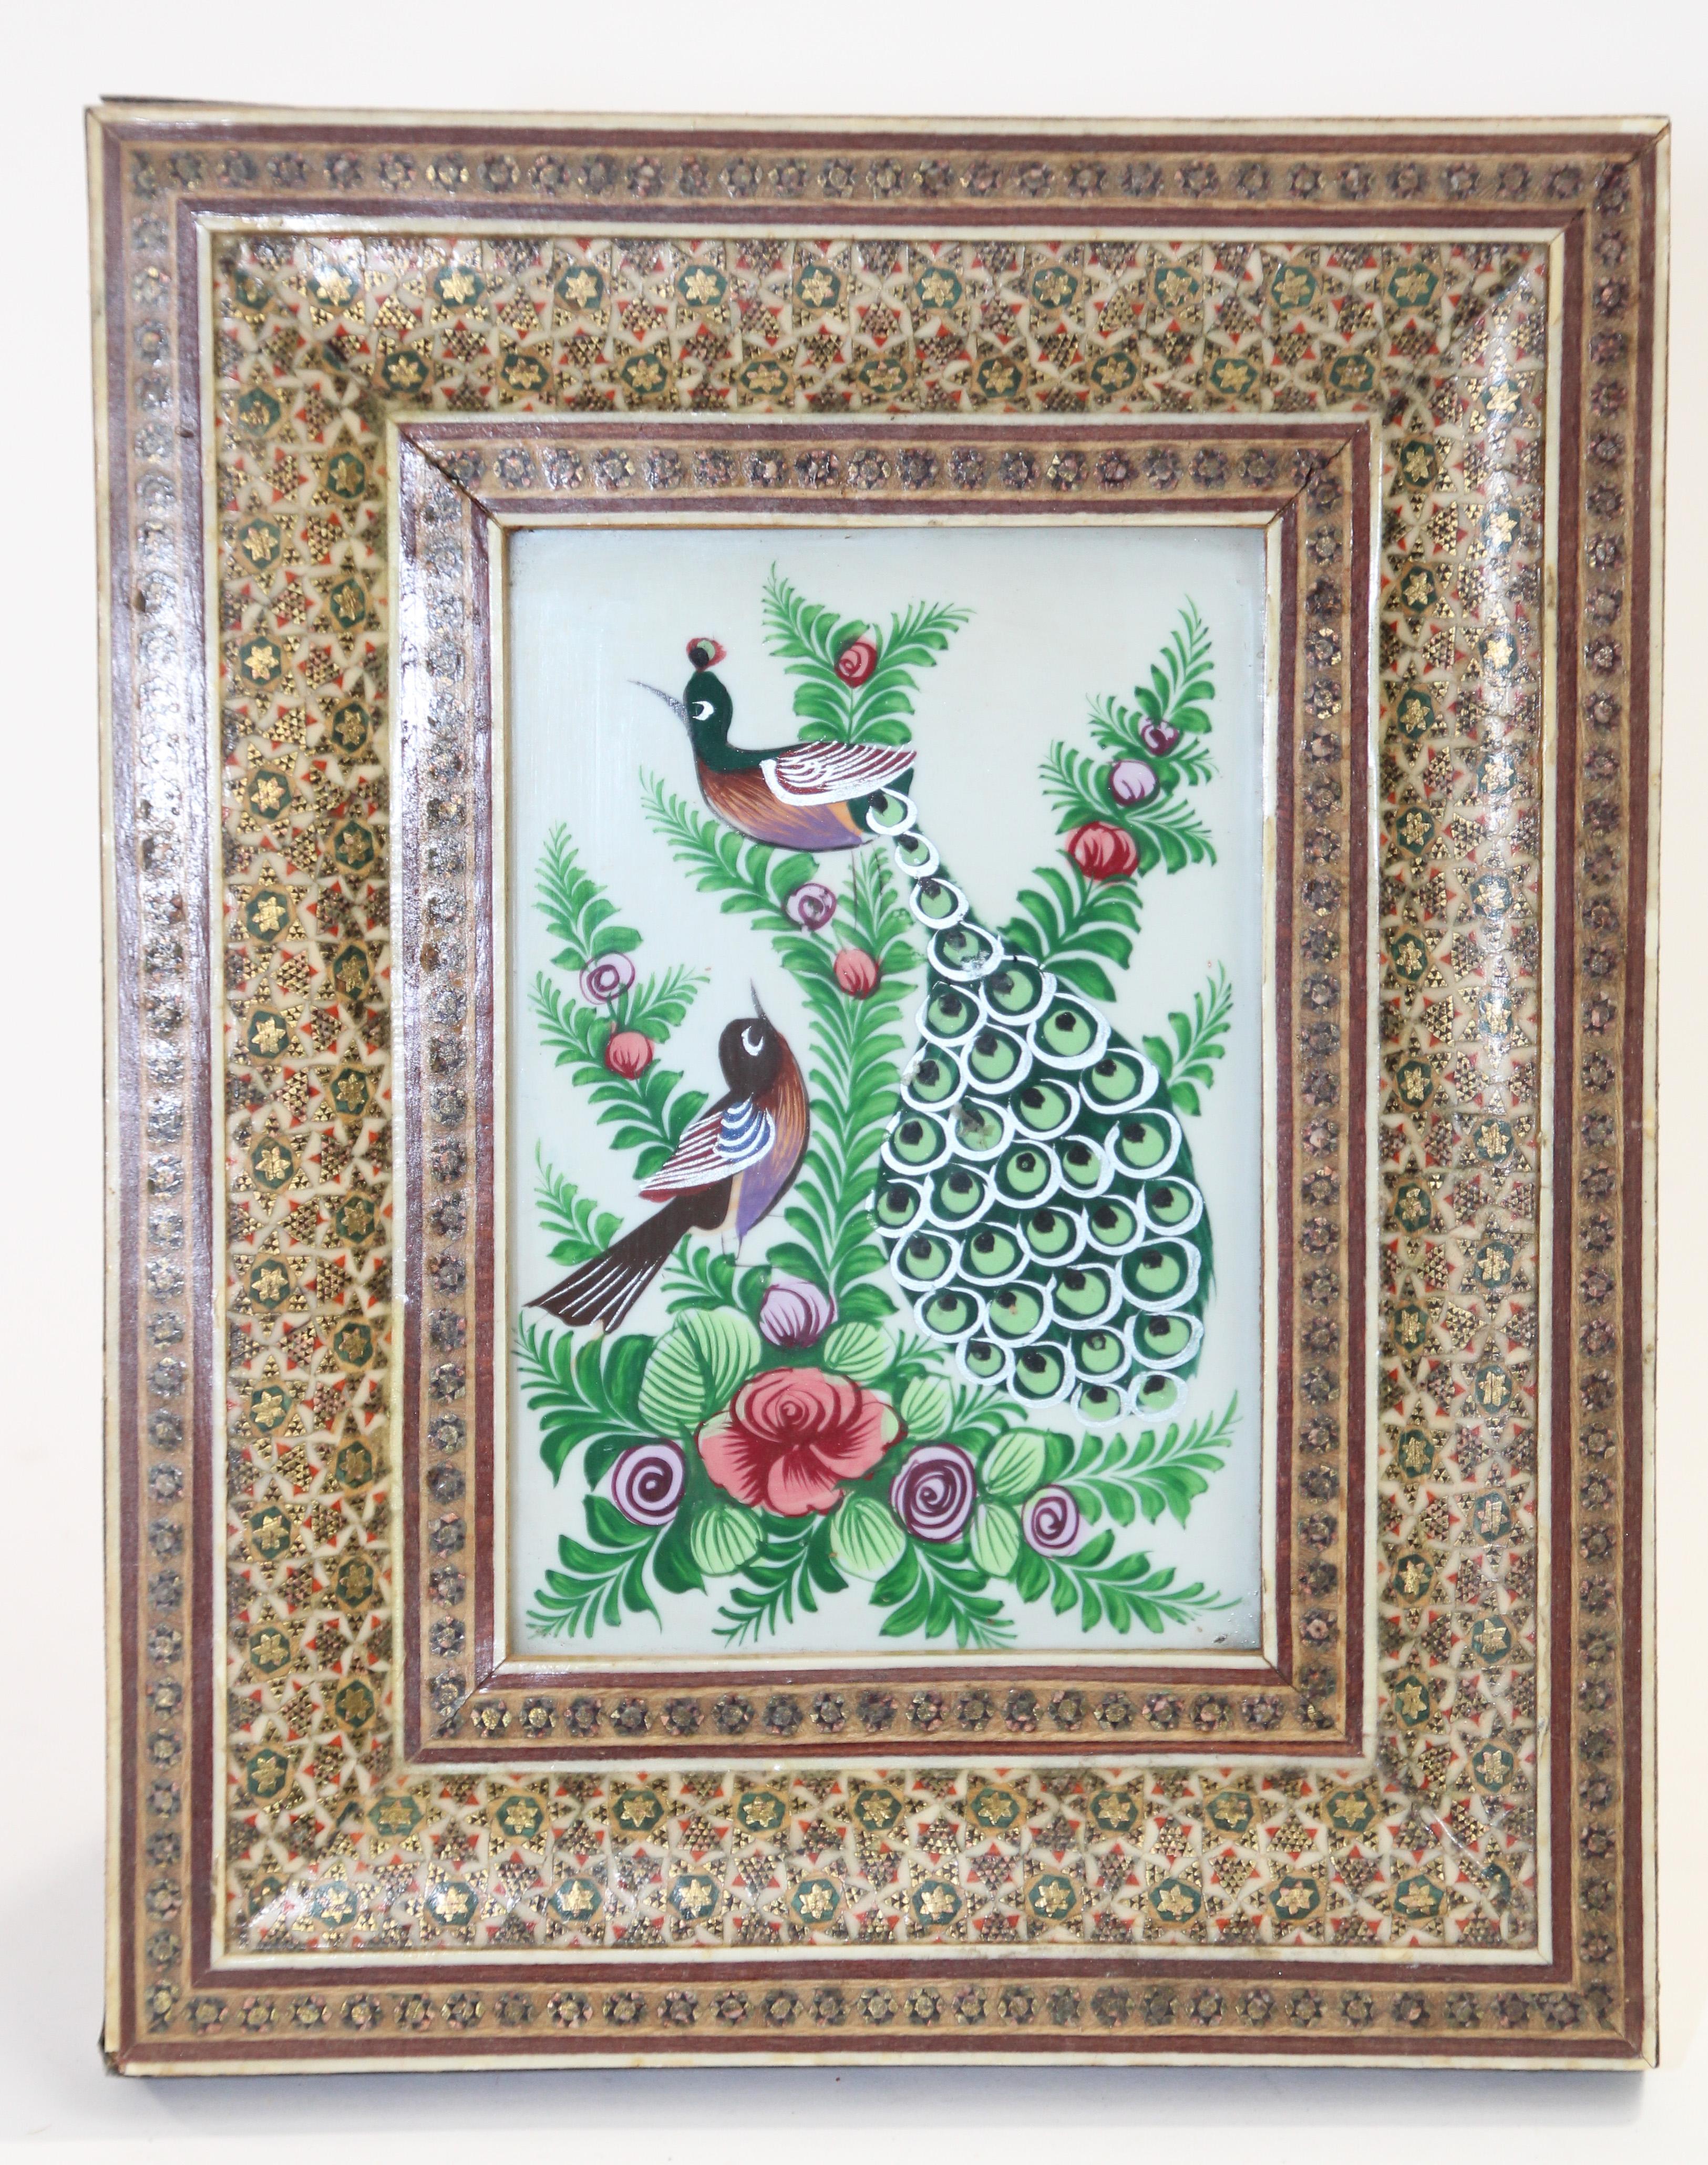 Middle Eastern miniature painting of peacocks framed in a Moorish micro mosaic inlaid picture frame.
Middle Eastern miniature painting on shell, very fine and colorful painting in an
intricate inlaid mosaic frame with floral and geometric Islamic